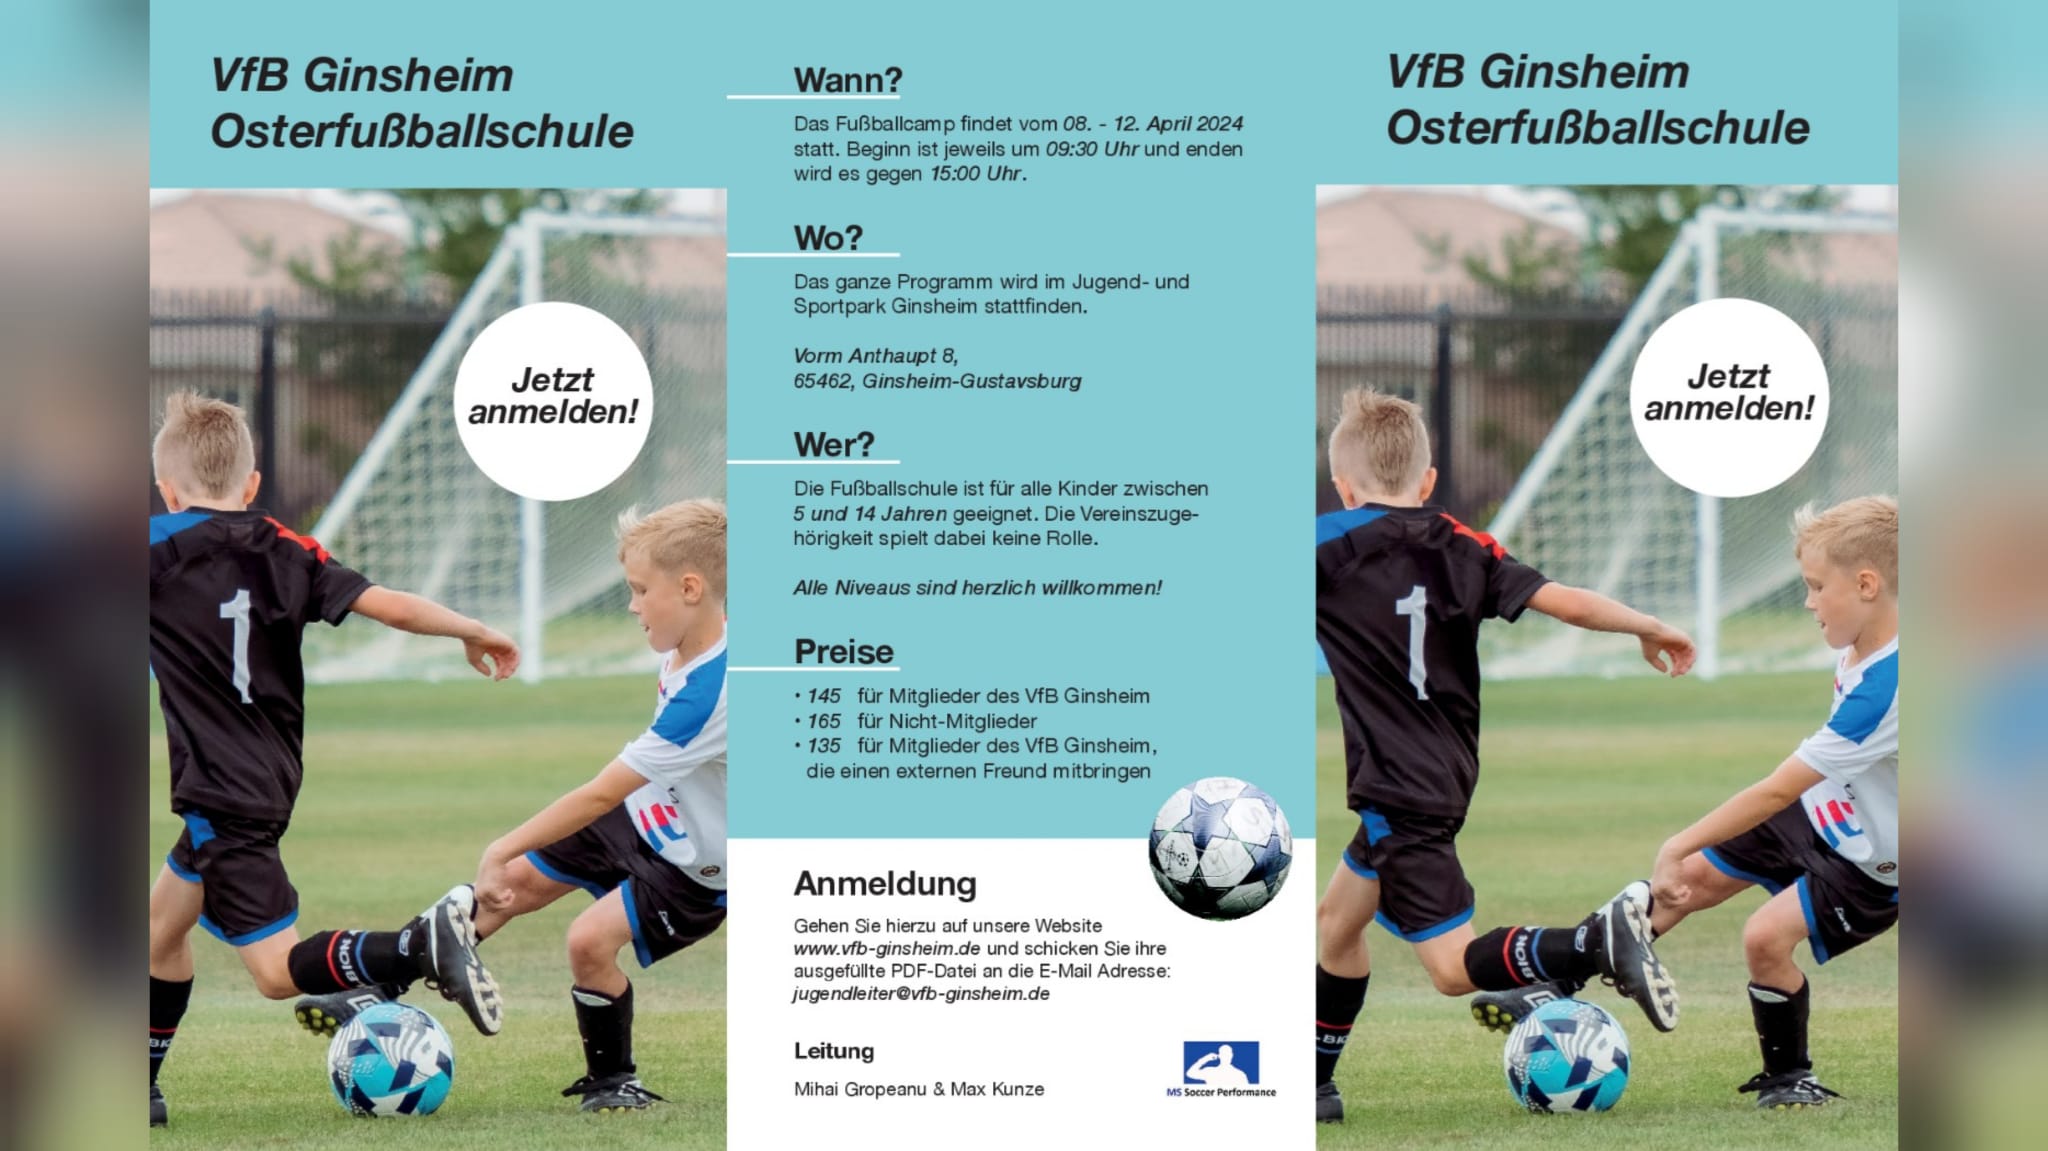 You are currently viewing VfB Ginsheim Osterfußballschule